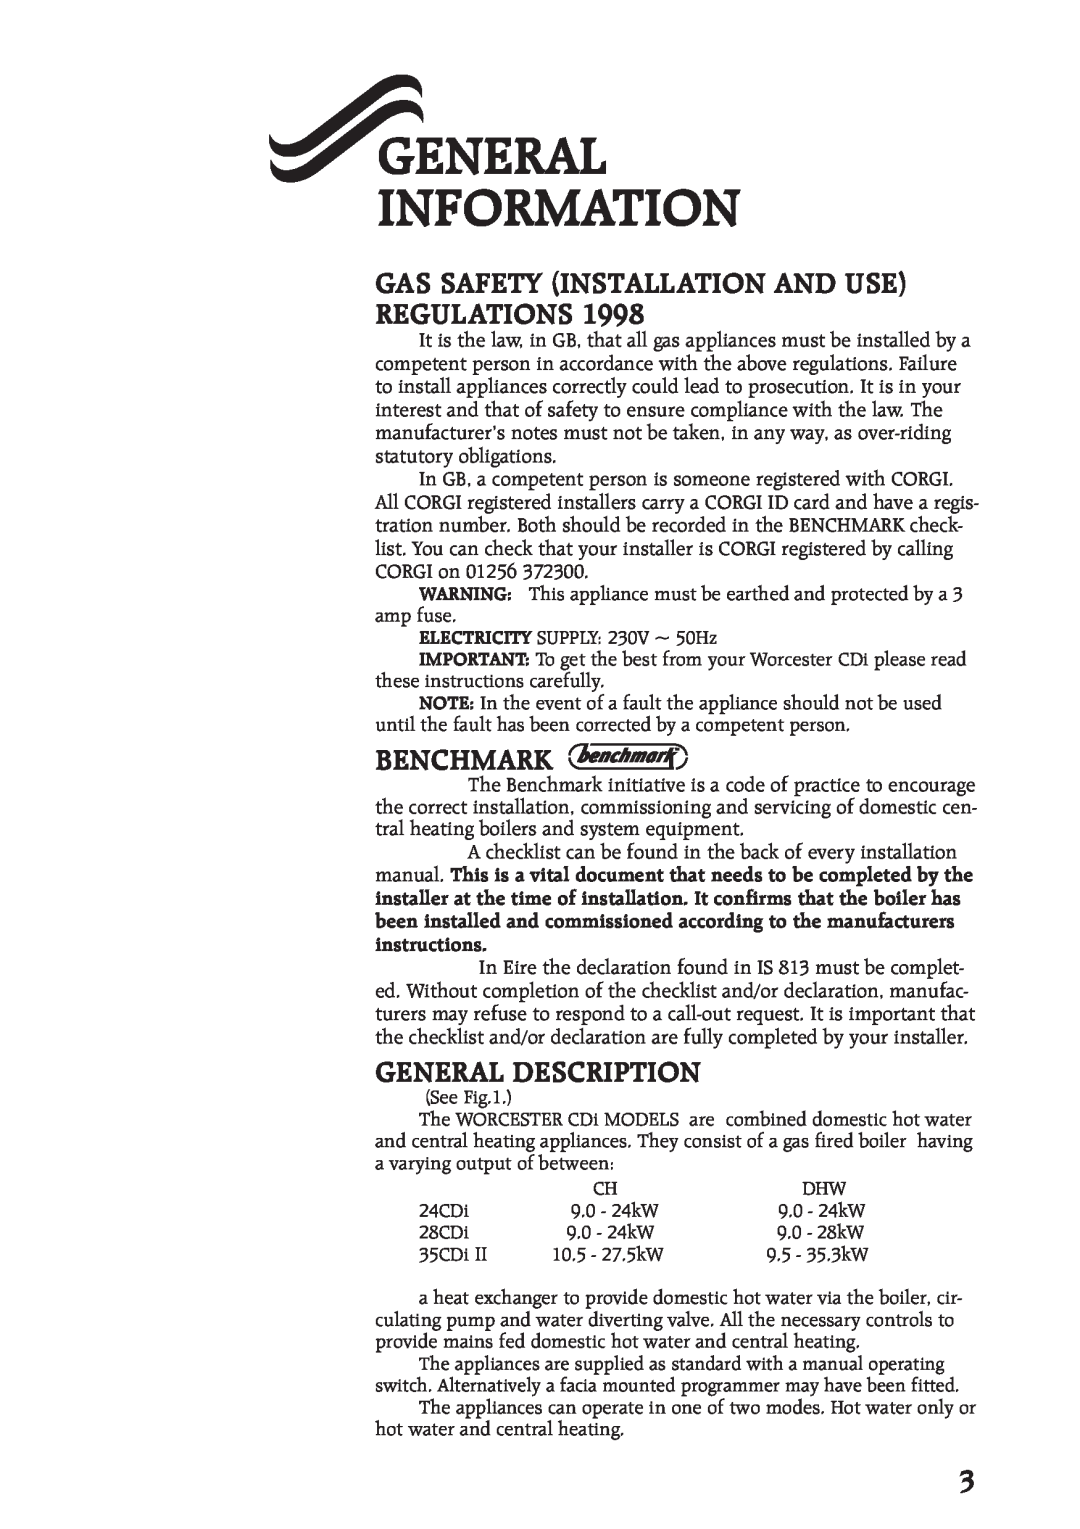 Bosch Appliances 28CDI General Information, Gas Safety Installation And Use Regulations, Benchmark, General Description 